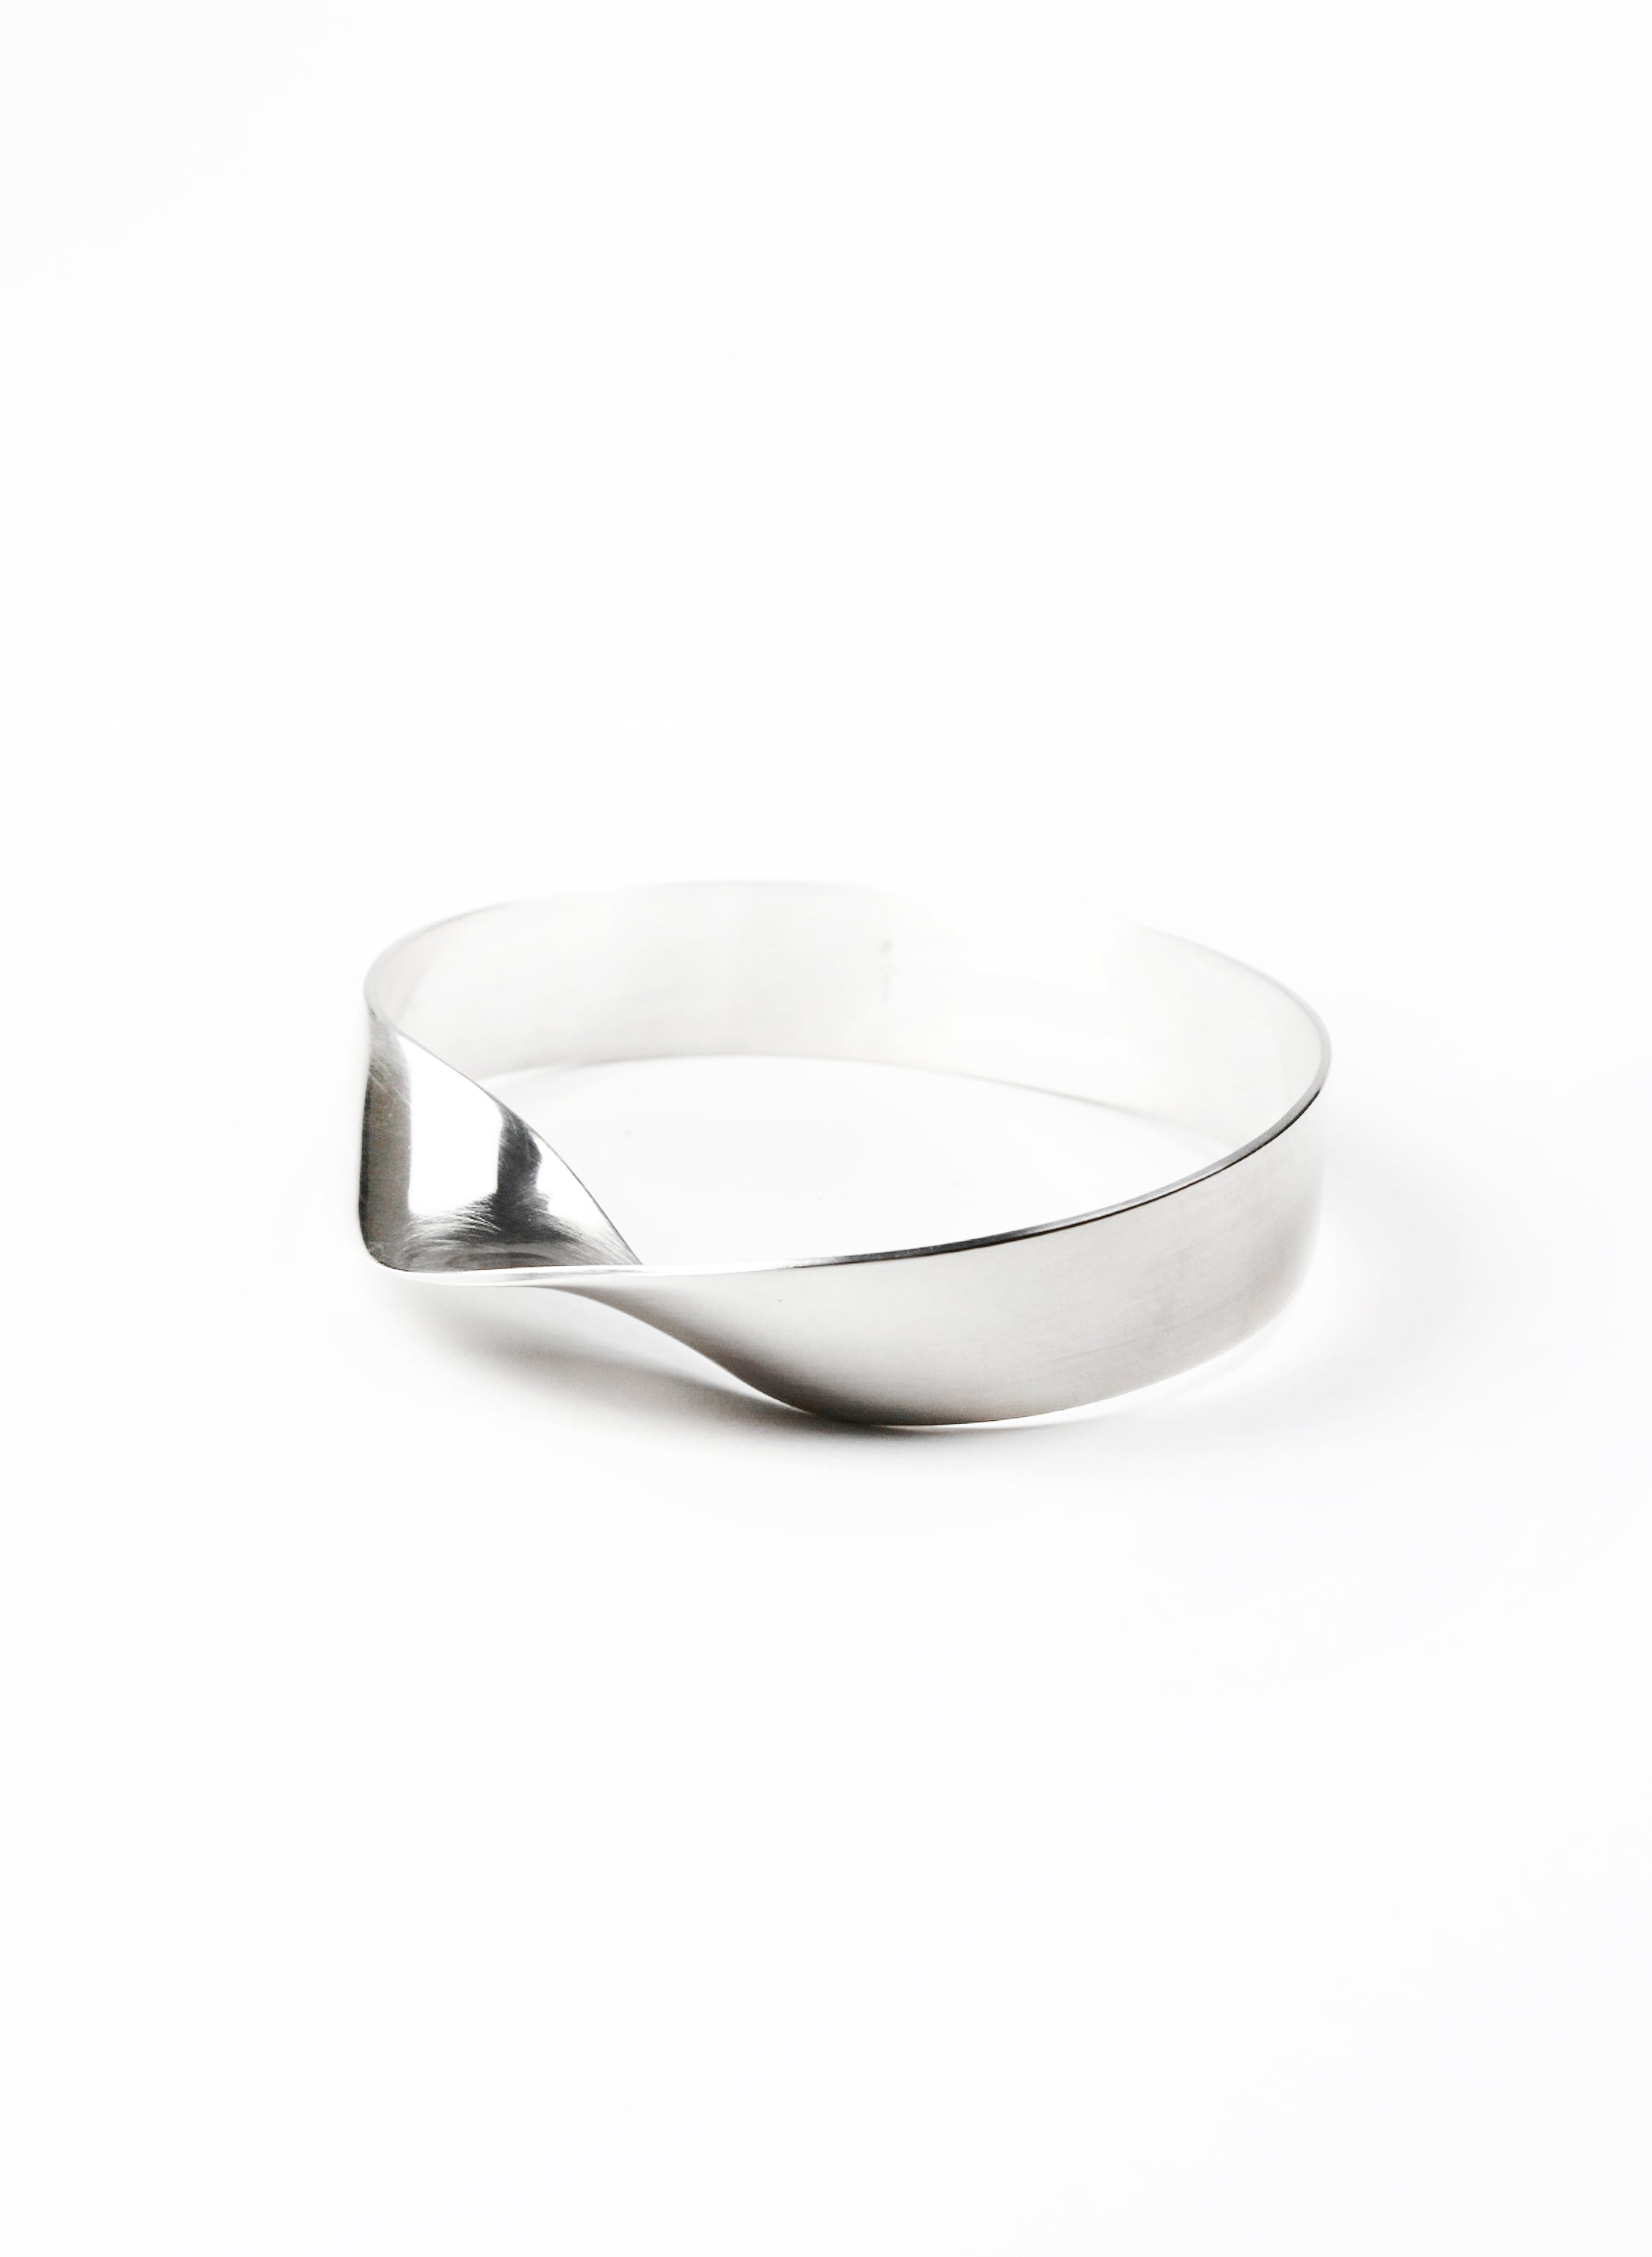 Mobius Bangle - Sterling Silver